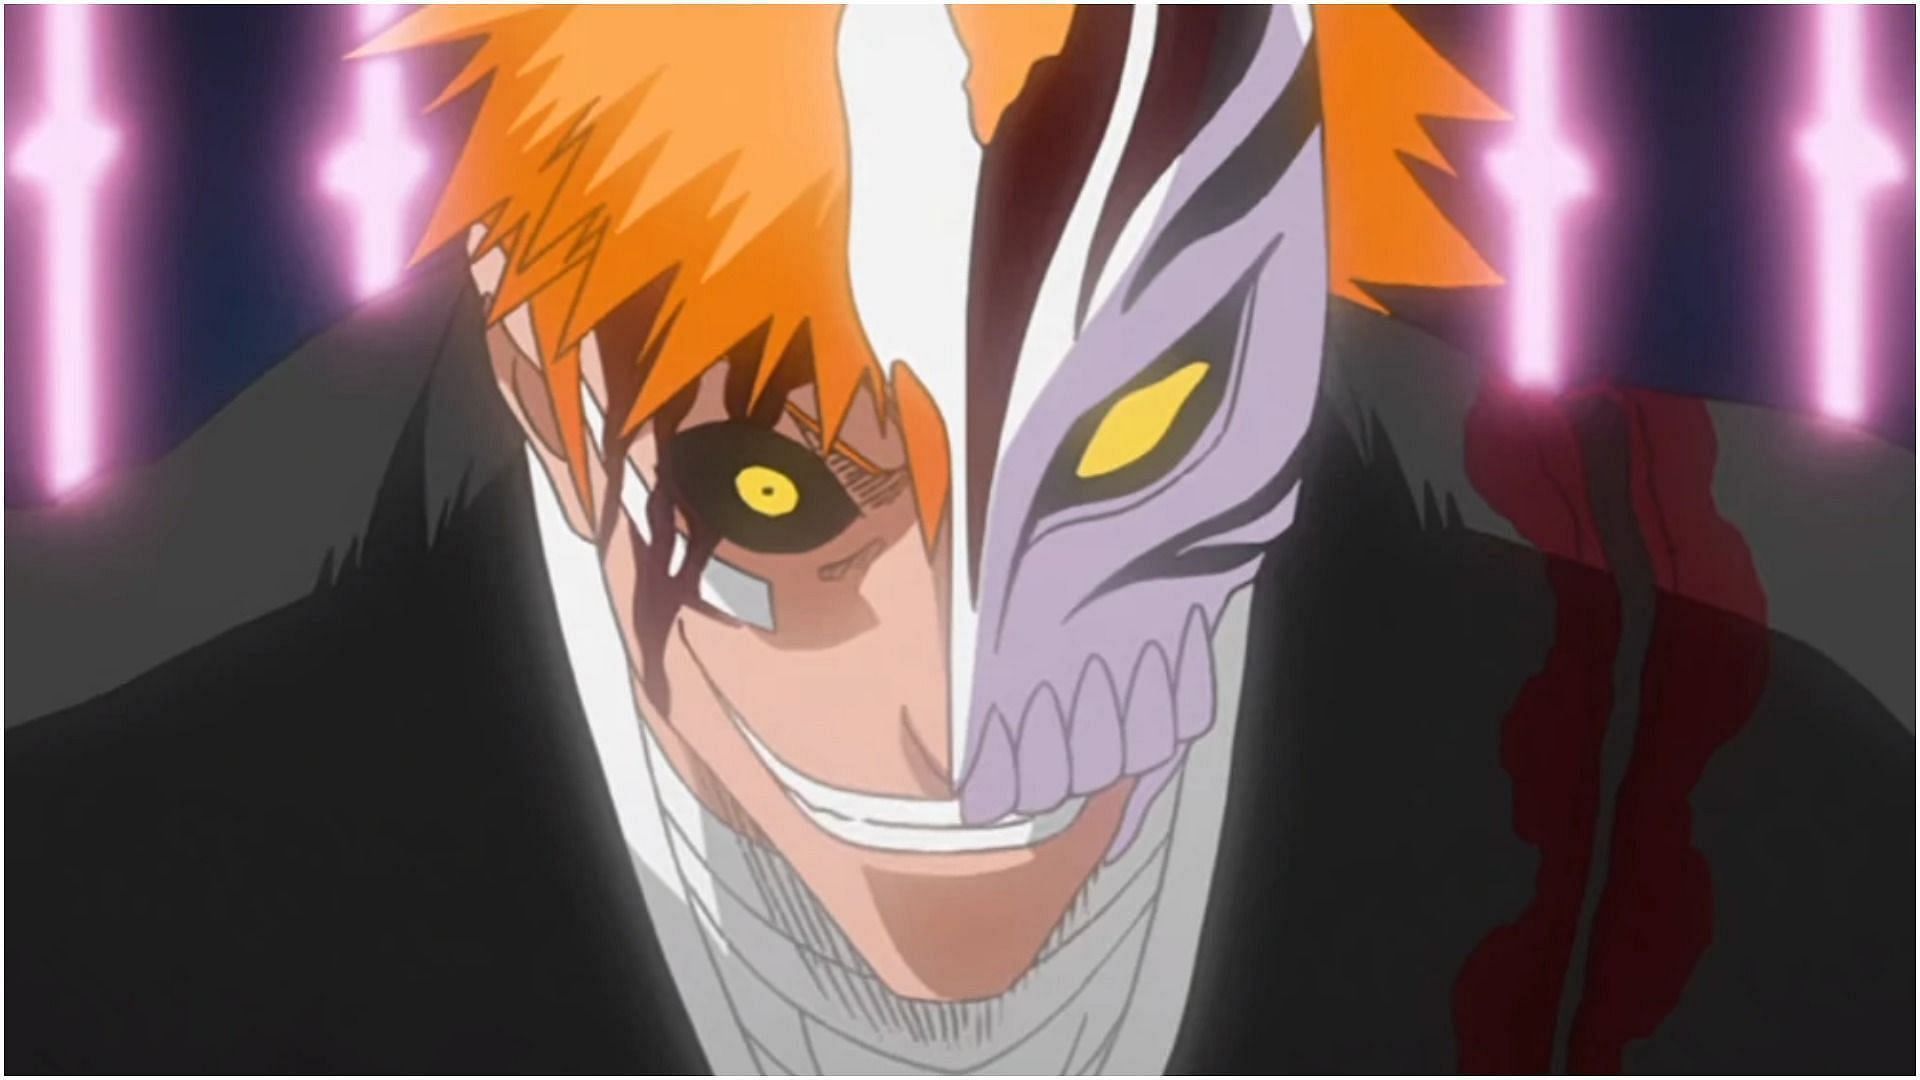 Understanding whether or not Ichigo used Mugetsu more than once in the Bleach series (Image via Studio Pierrot)